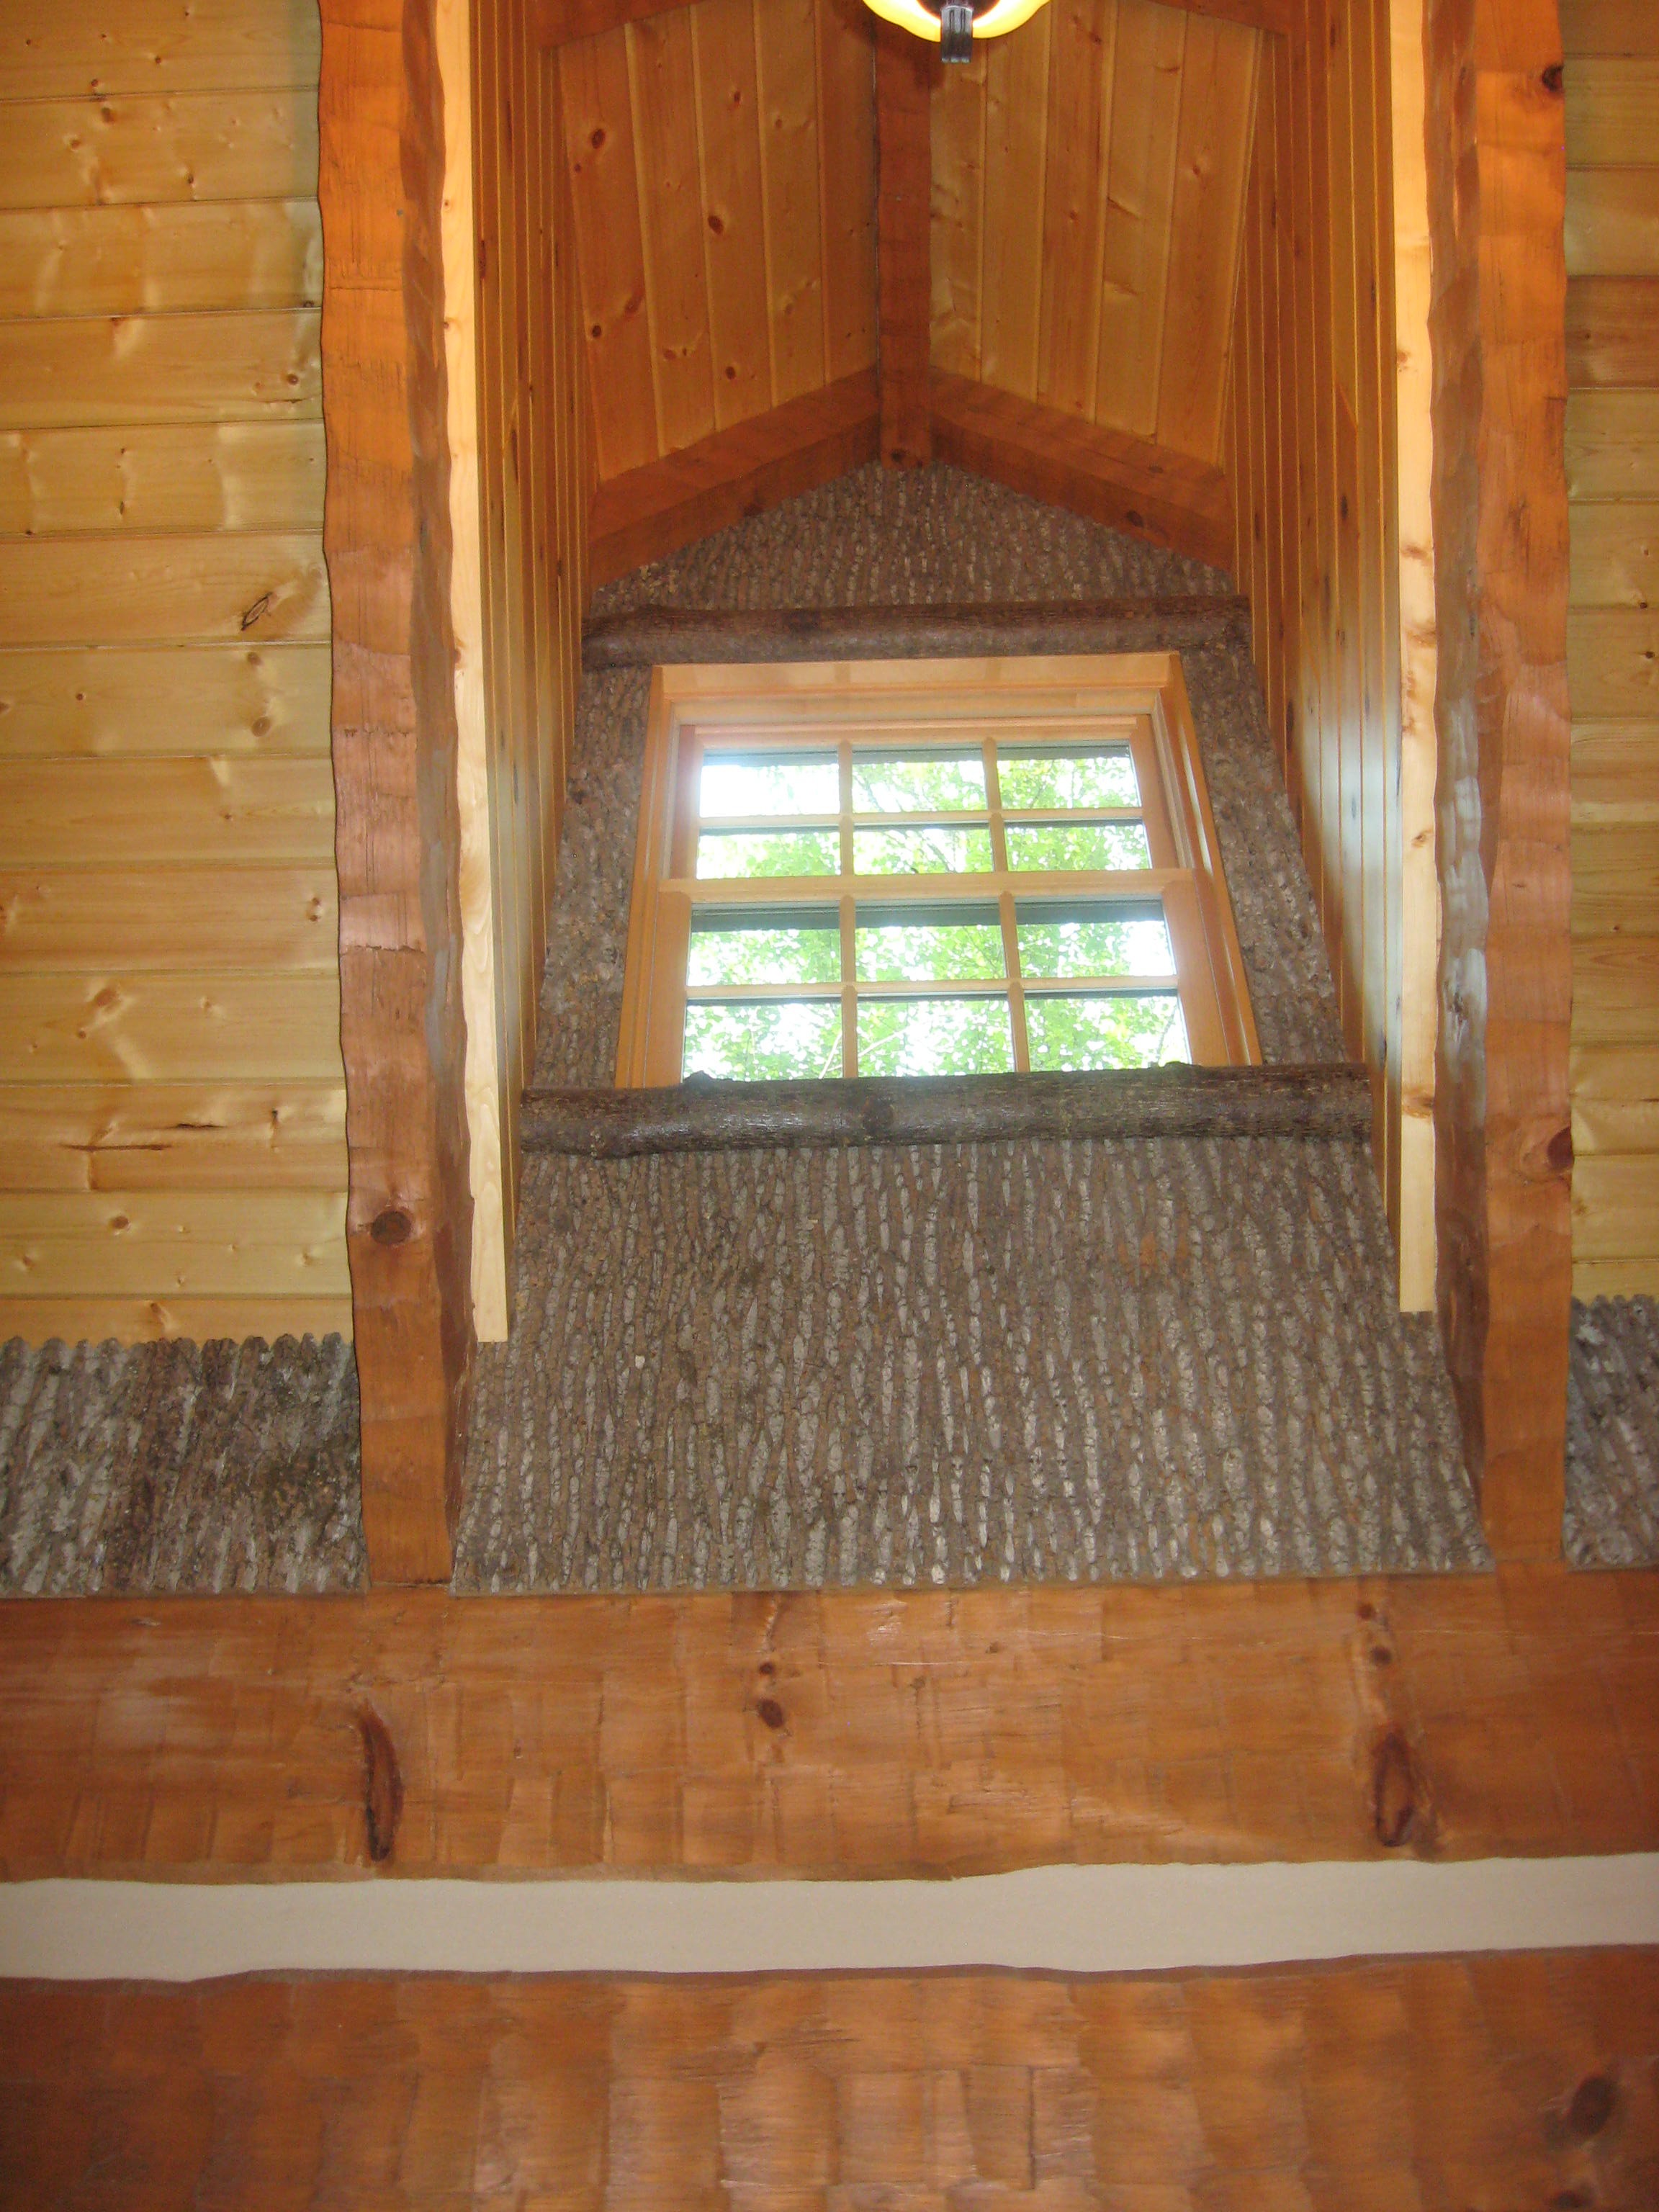 poplar bark interior design detail adds rustic accent to boone nc home